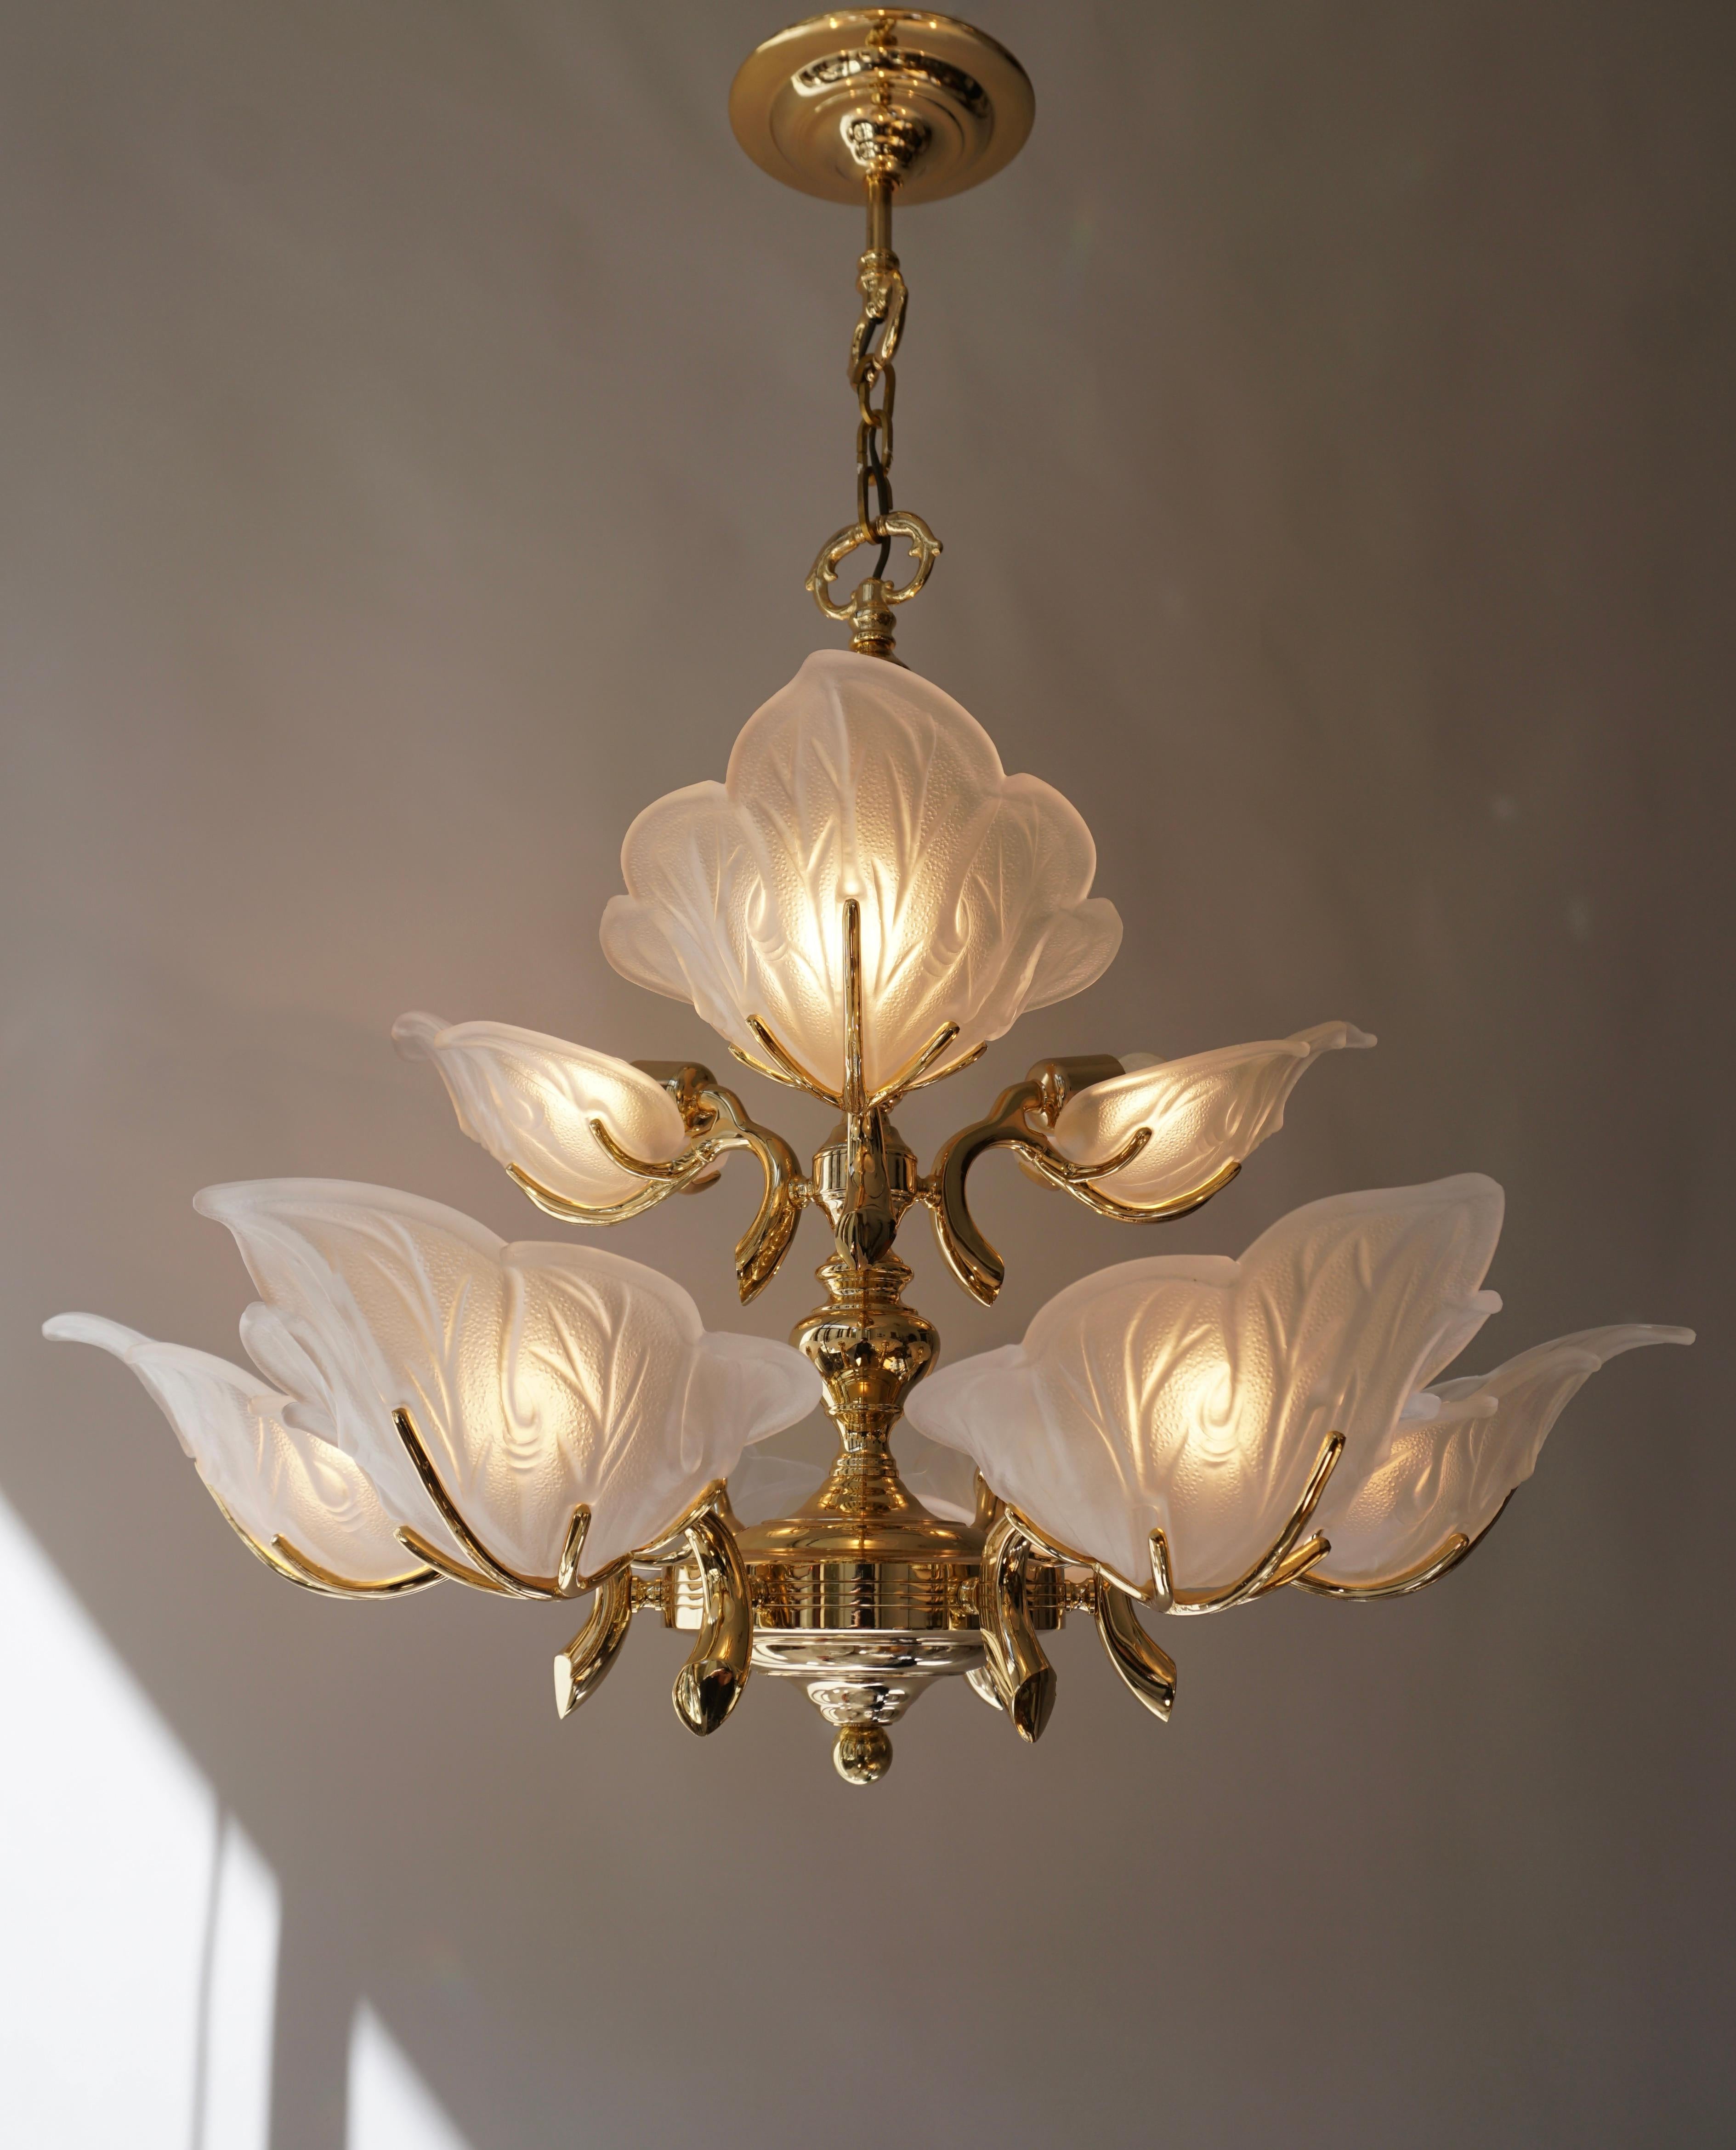 Wonderful chandelier made in Italy with 12 beautiful characteristic Murano frosted glass shells on a brass base. Manufactured in the early 1970s. Very impressive large glass chandelier and beautiful light effect when lit. 

The light requires nine